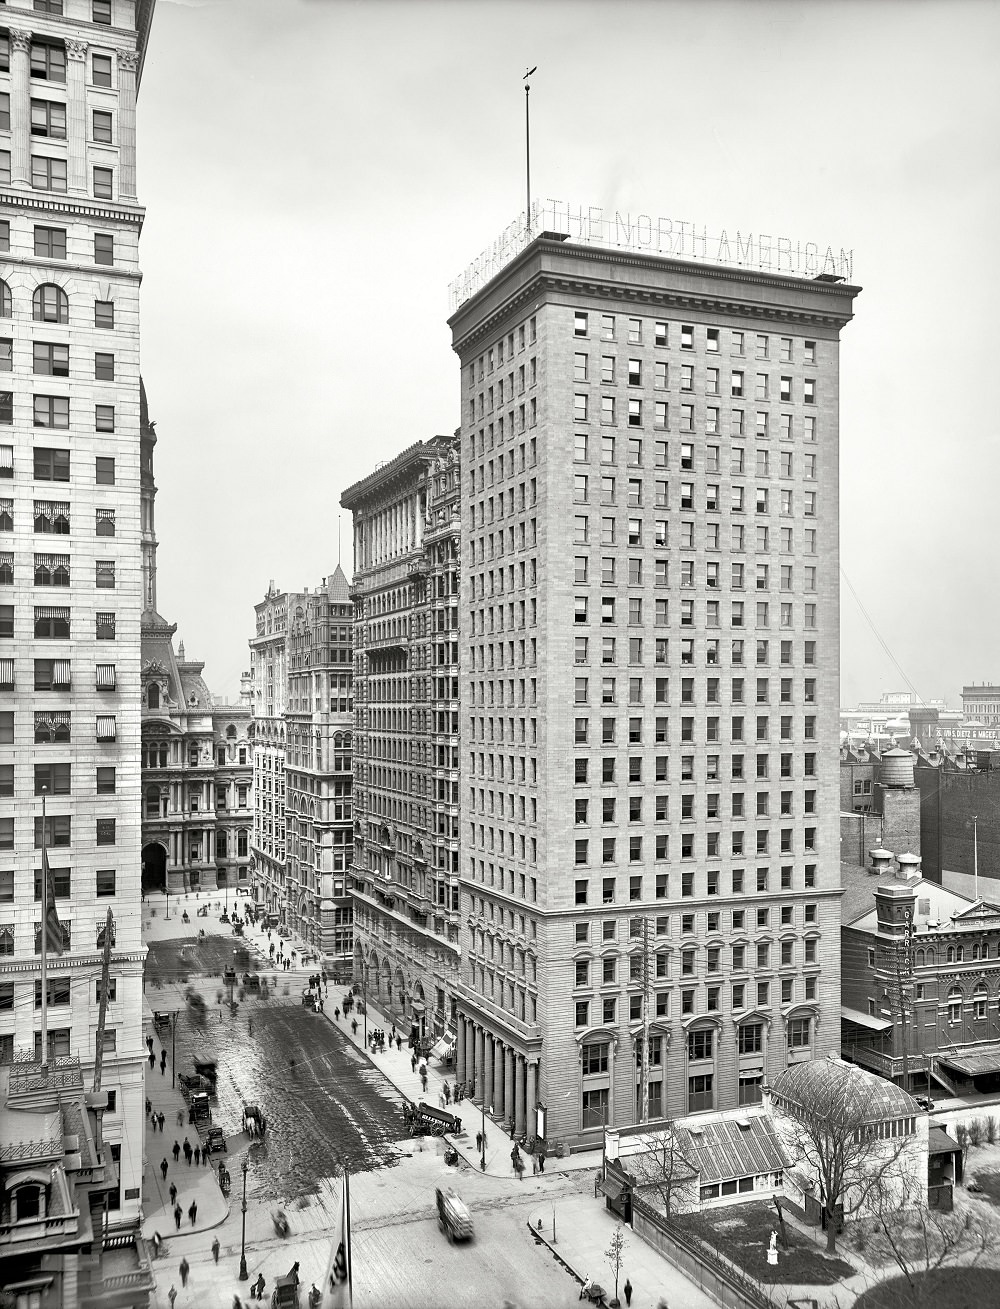 North American, Real Estate Trust, City Hall and Land Title Building, Philadelphia circa 1905